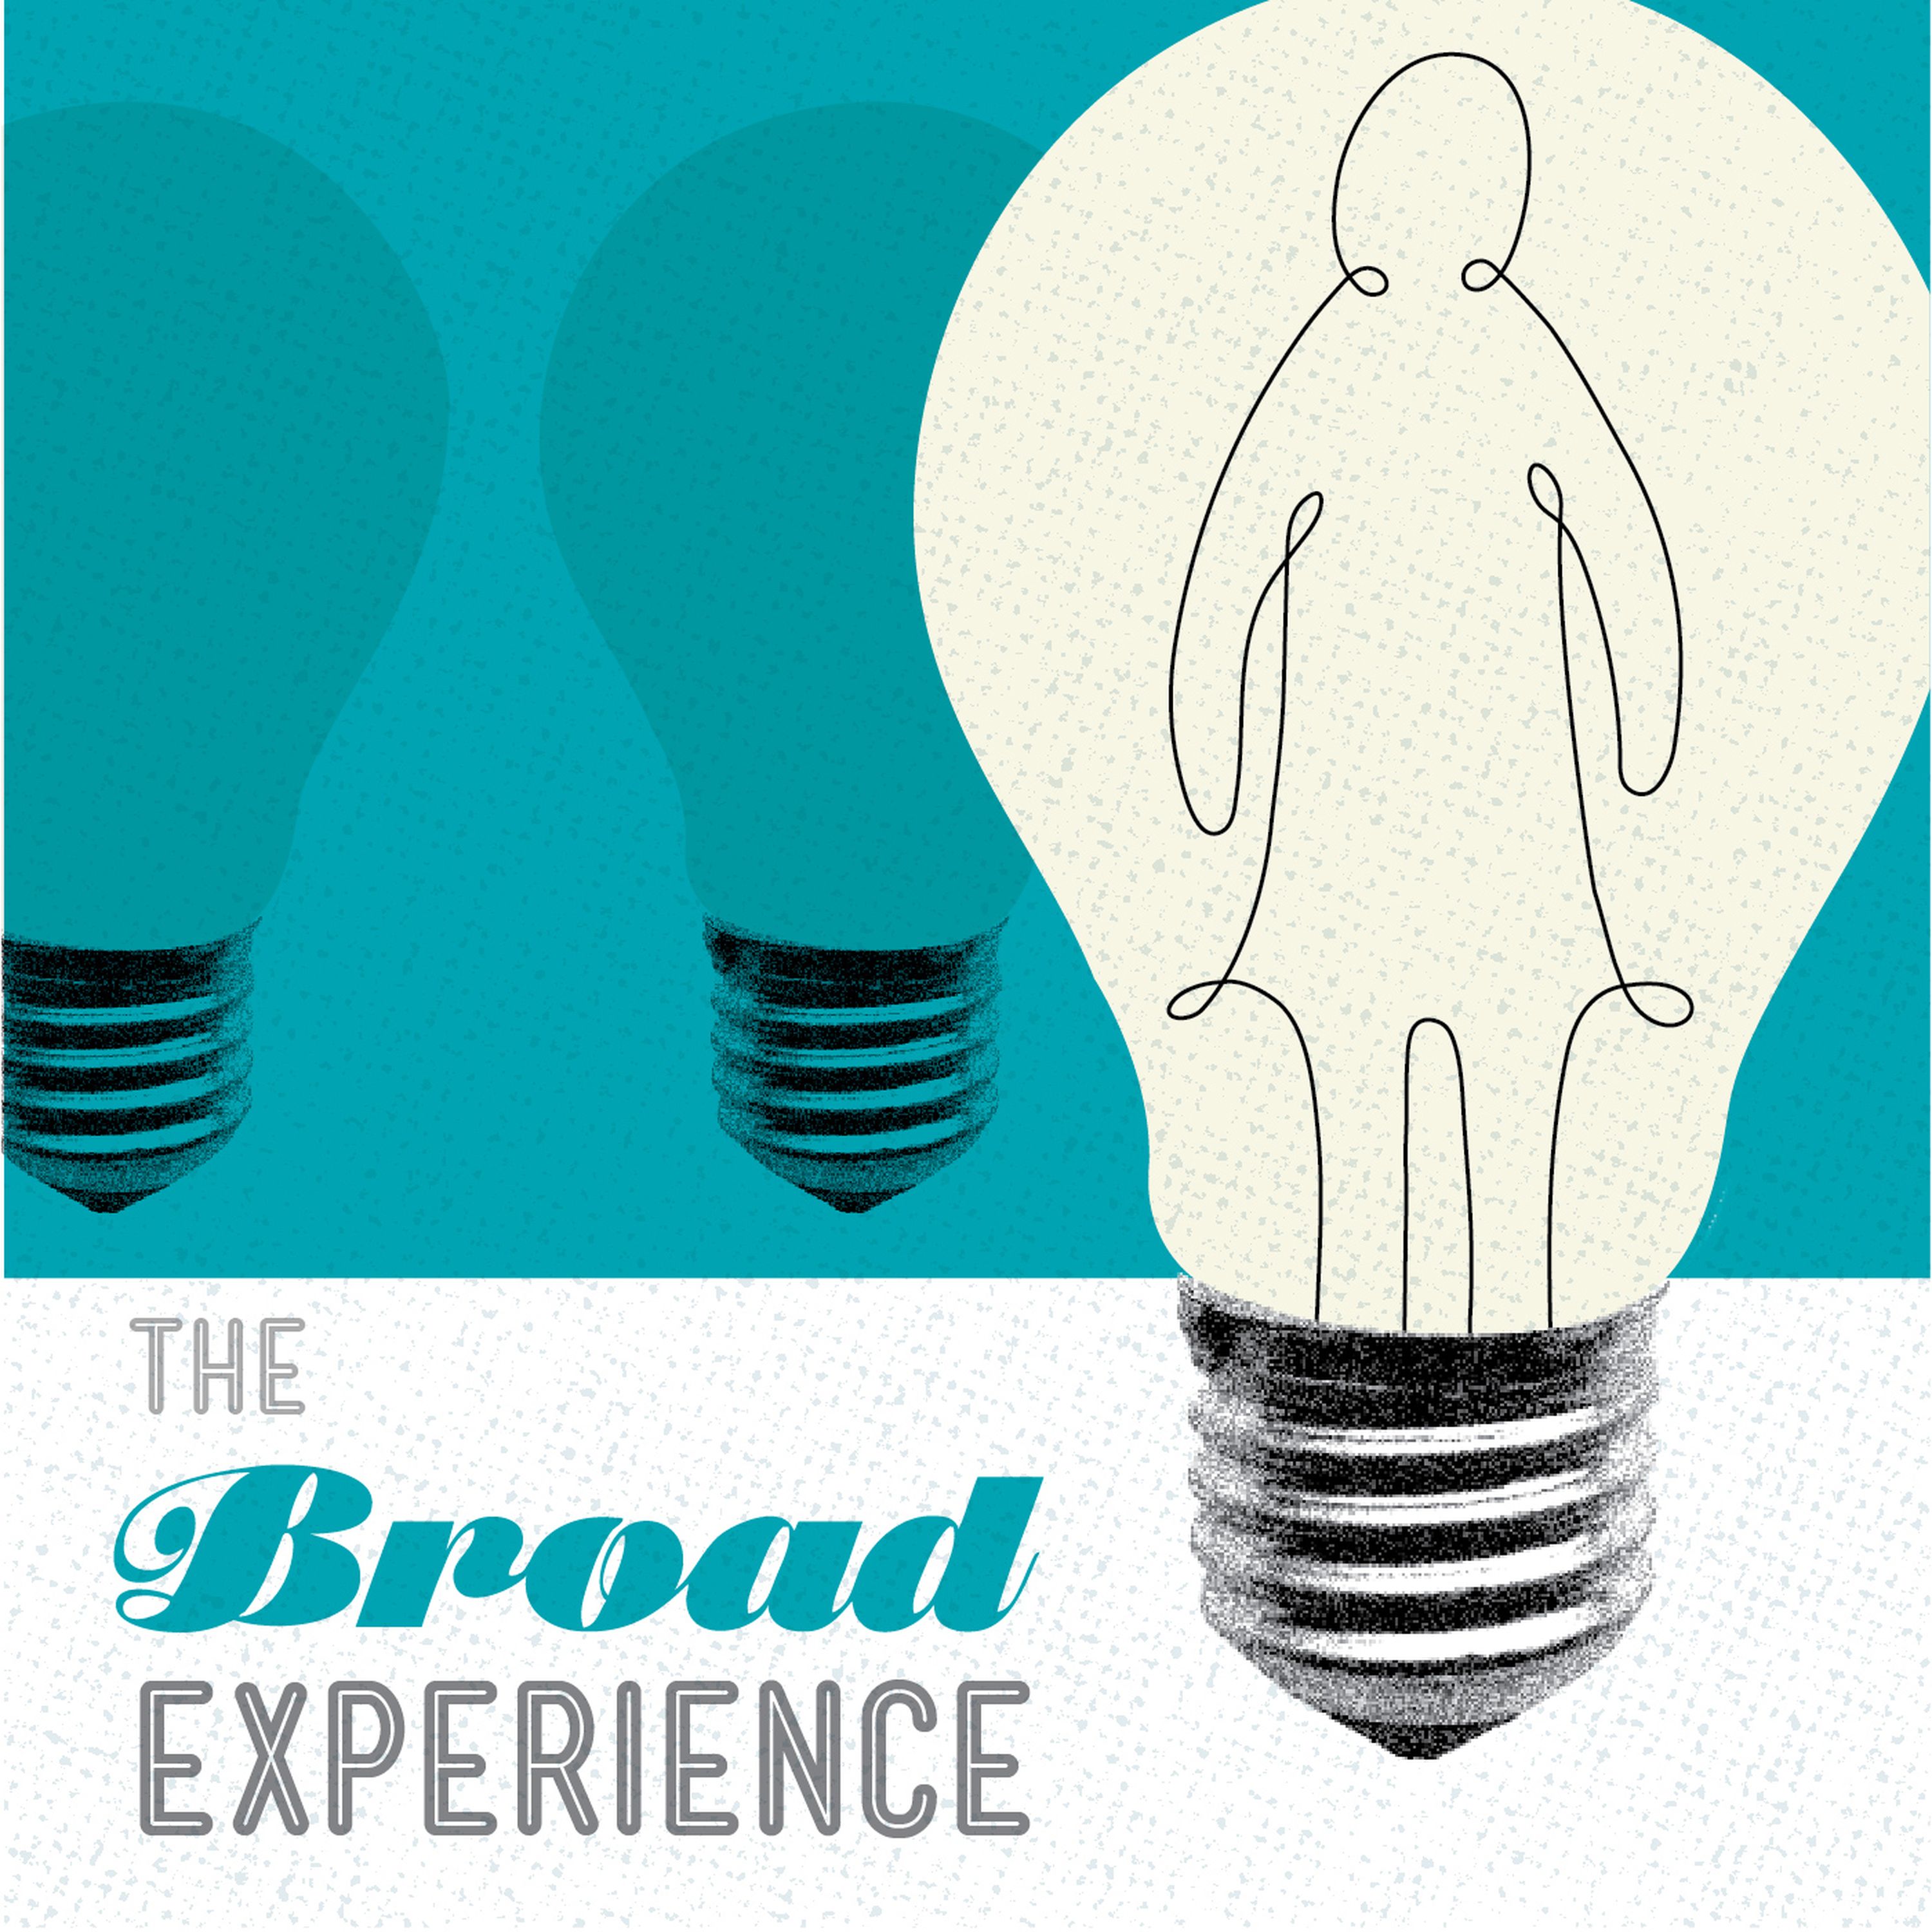 The Broad Experience 49: The pace of progress